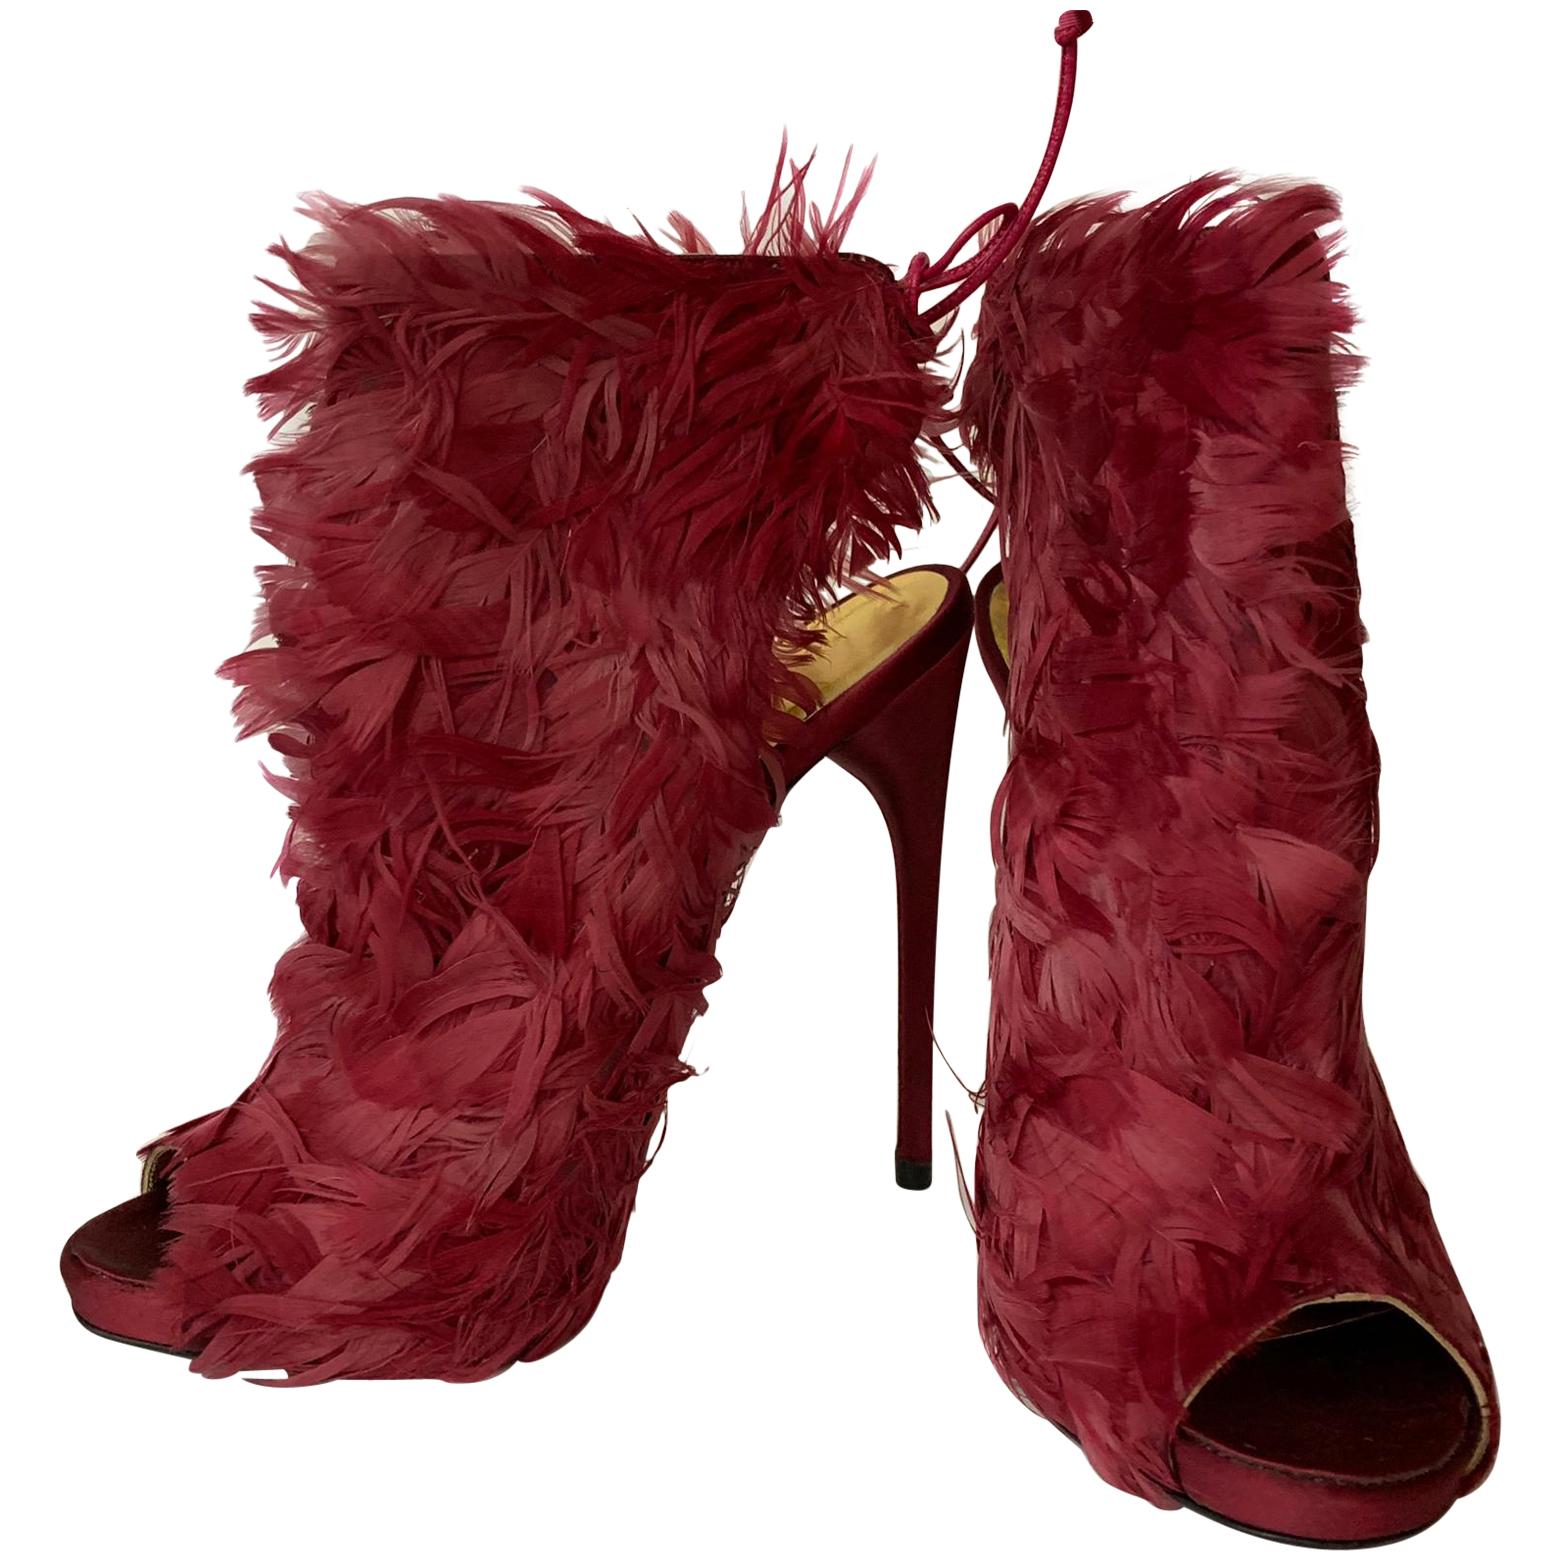 Tom Ford Red Sandal in ostrich feathers For Sale